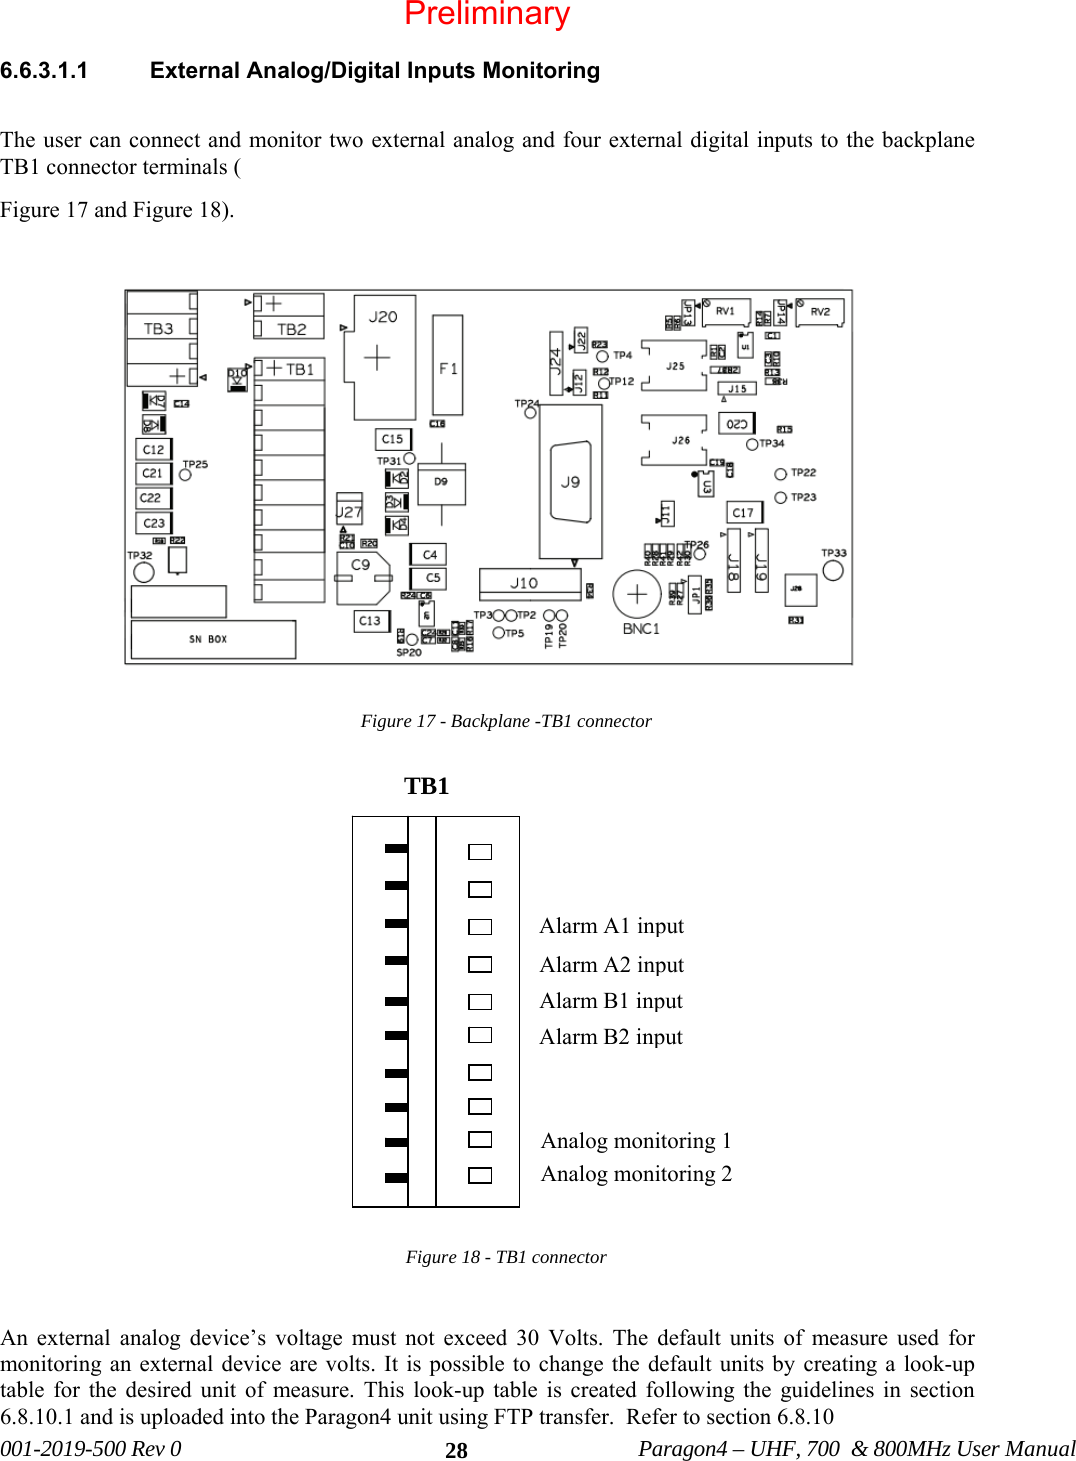   001-2019-500 Rev 0          Paragon4 – UHF, 700  &amp; 800MHz User Manual   286.6.3.1.1  External Analog/Digital Inputs Monitoring   The user can connect and monitor two external analog and four external digital inputs to the backplane TB1 connector terminals ( Figure 17 and Figure 18).     Figure 17 - Backplane -TB1 connector  Figure 18 - TB1 connector  An external analog device’s voltage must not exceed 30 Volts. The default units of measure used for monitoring an external device are volts. It is possible to change the default units by creating a look-up table for the desired unit of measure. This look-up table is created following the guidelines in section 6.8.10.1 and is uploaded into the Paragon4 unit using FTP transfer.  Refer to section 6.8.10    TB1 Analog monitoring 2   Analog monitoring 1   Alarm B2 input Alarm B1 input Alarm A2 input Alarm A1 input Preliminary